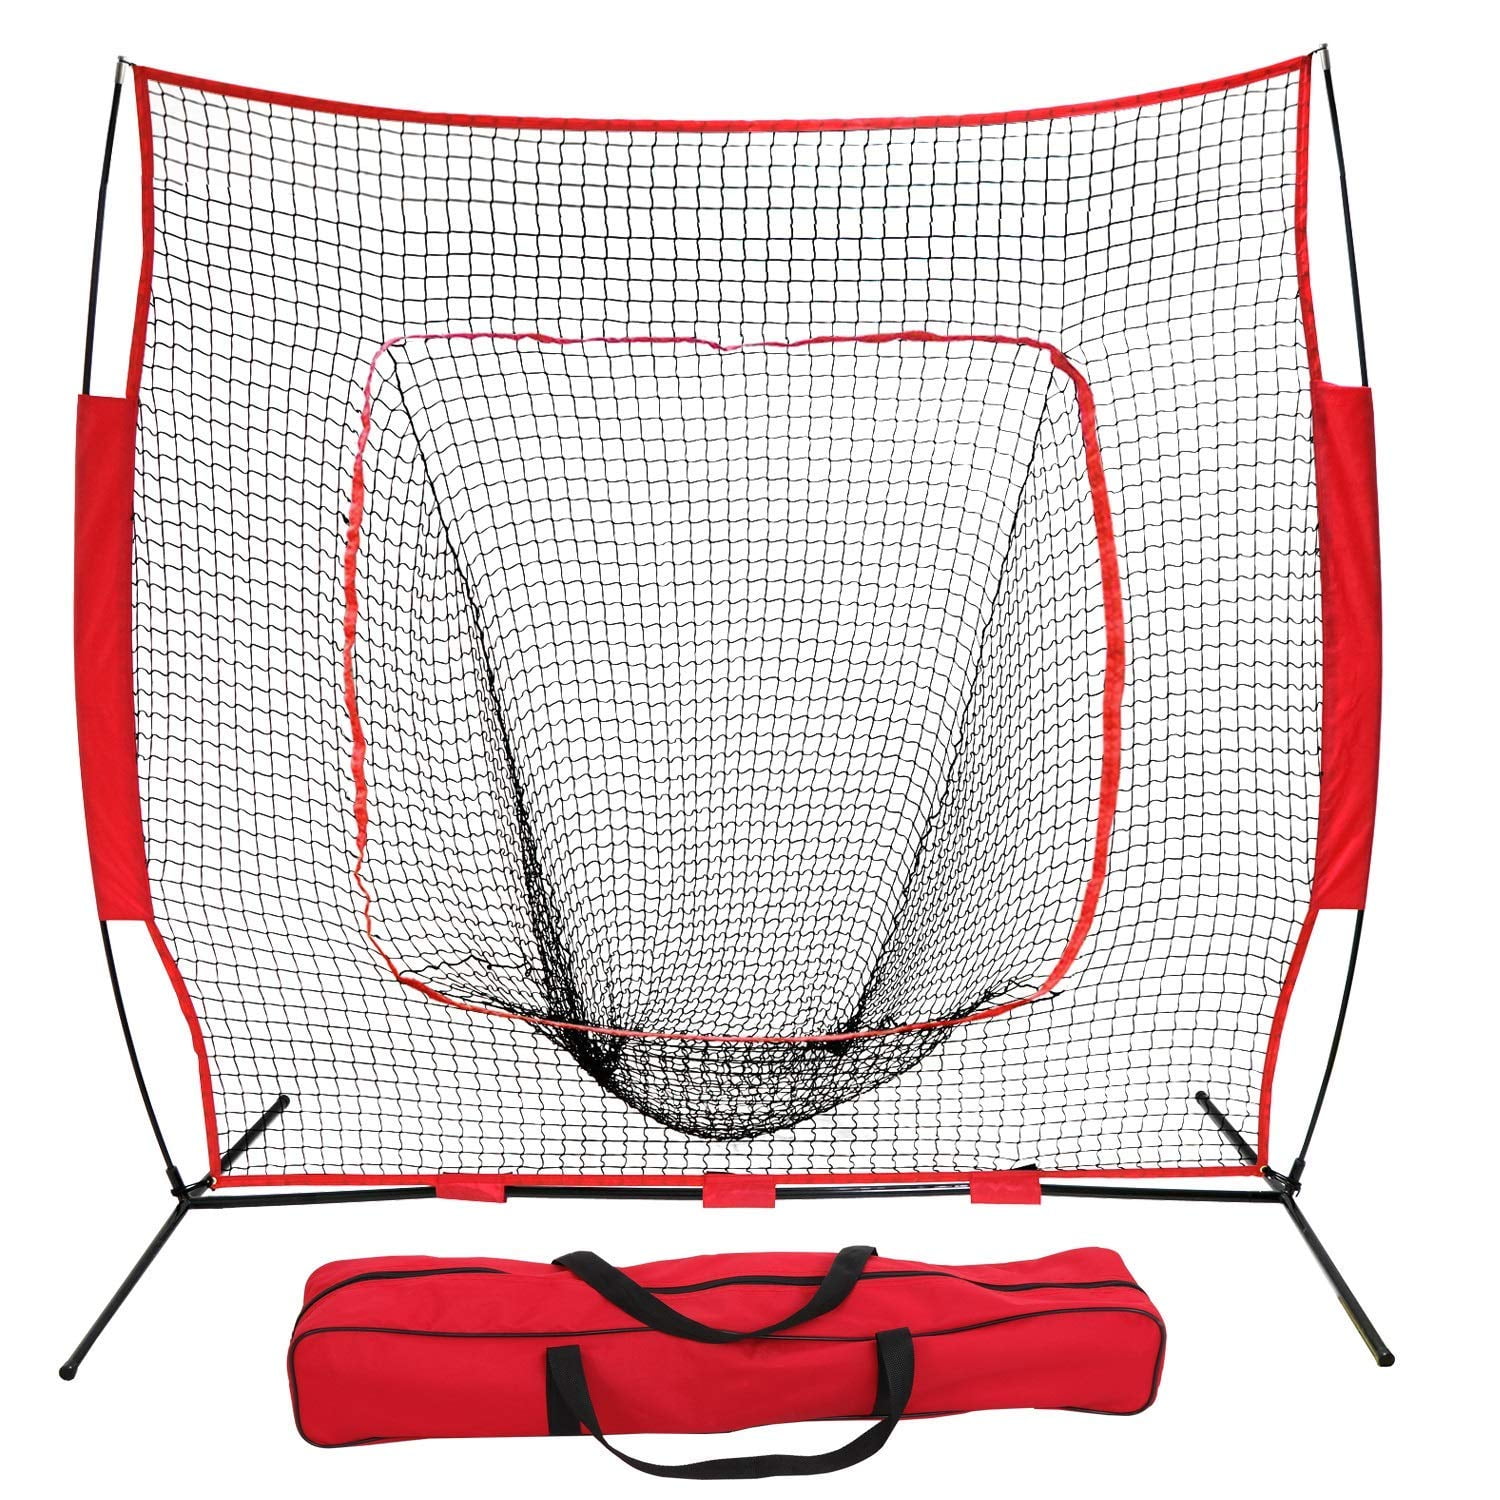 Red Baseball 7 x 7' Net Practice Hitting Pitching Batting and Catching with Bag